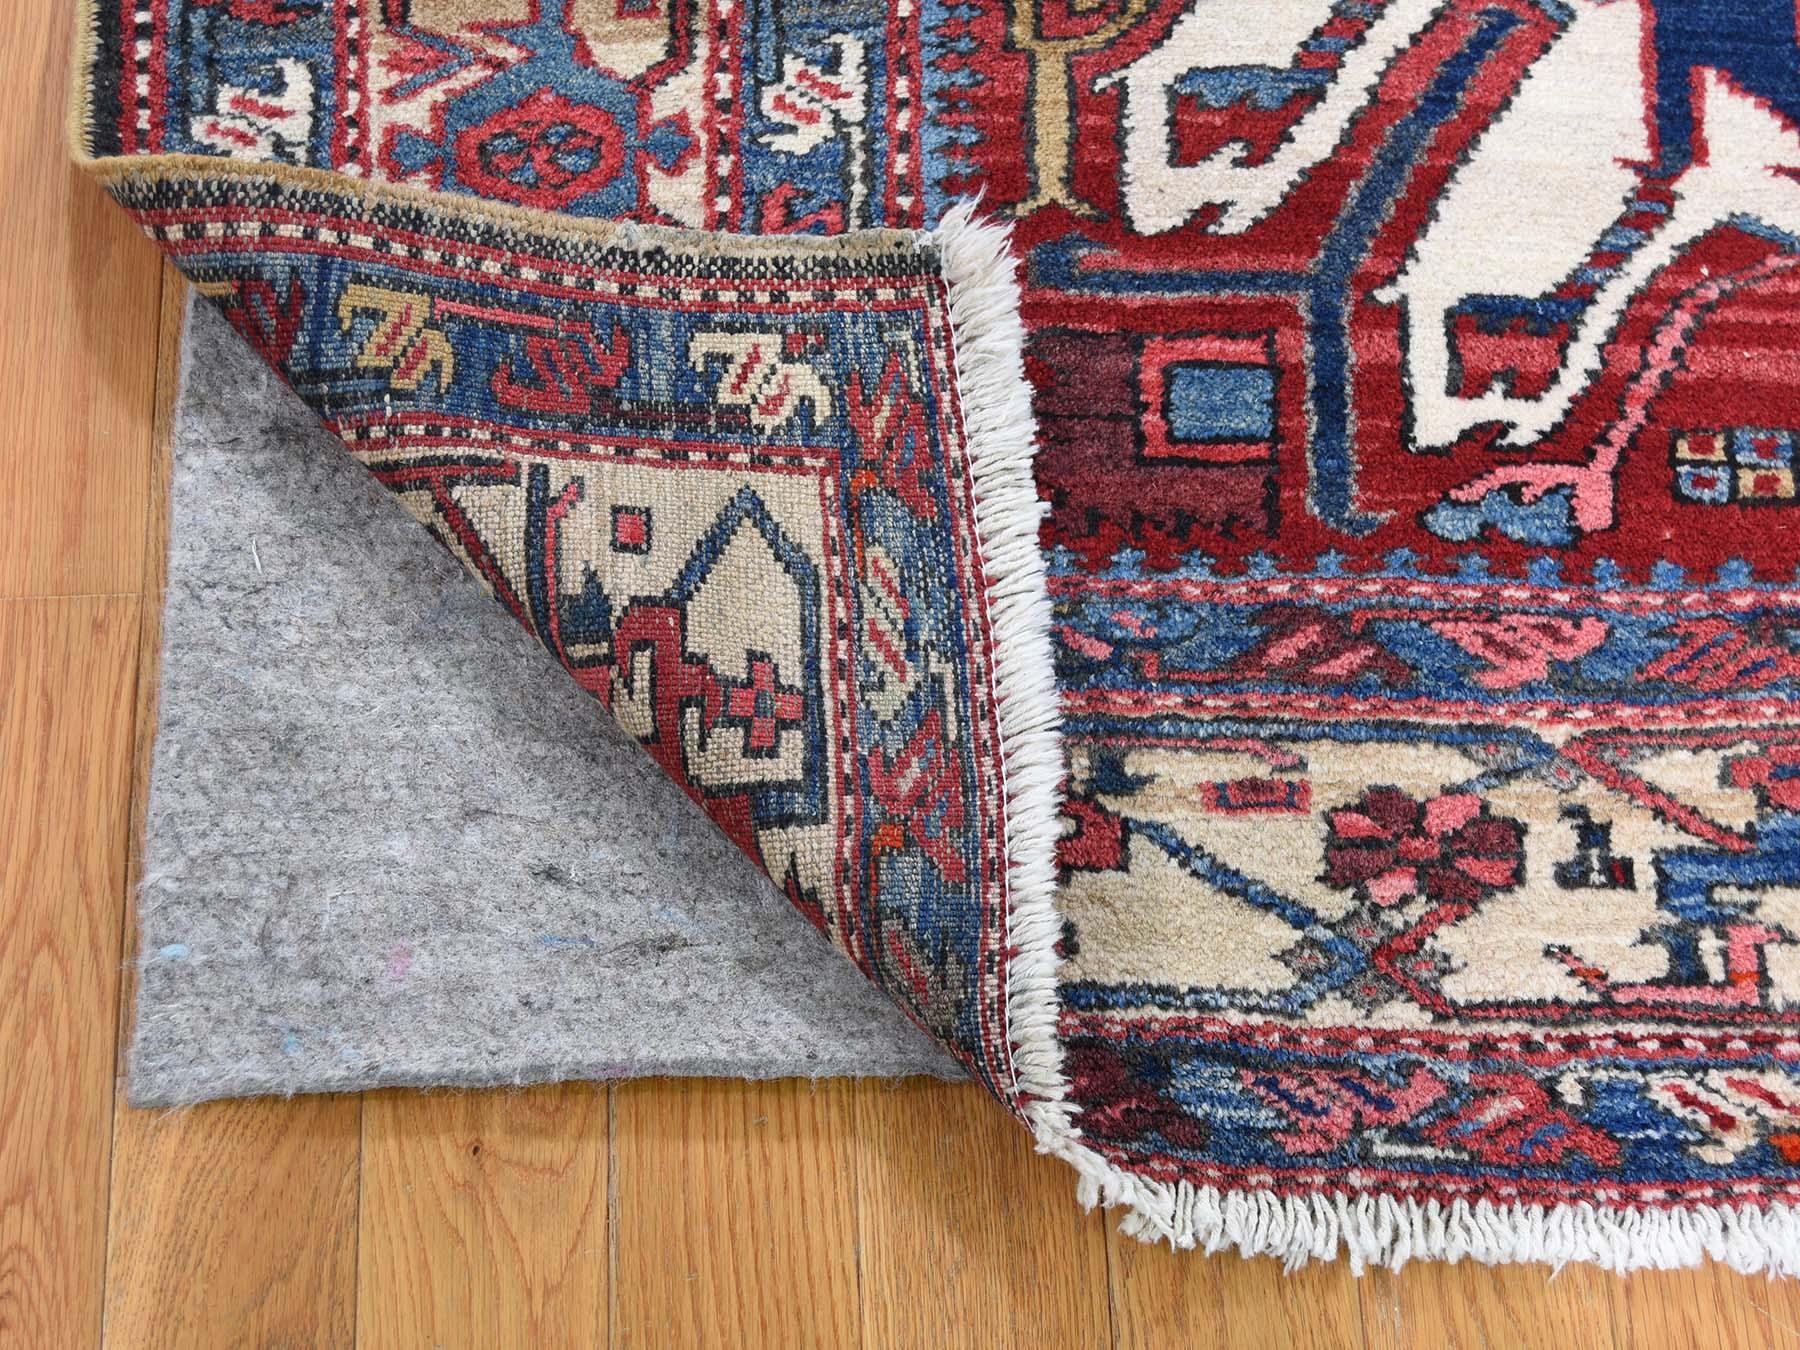 This is a genuine hand knotted oriental rug. It is not hand tufted or machine made rug. Our entire inventory is made of either hand knotted or handwoven rugs.

Start a new room with this wonderful hand knotted antique, it is an original pure wool